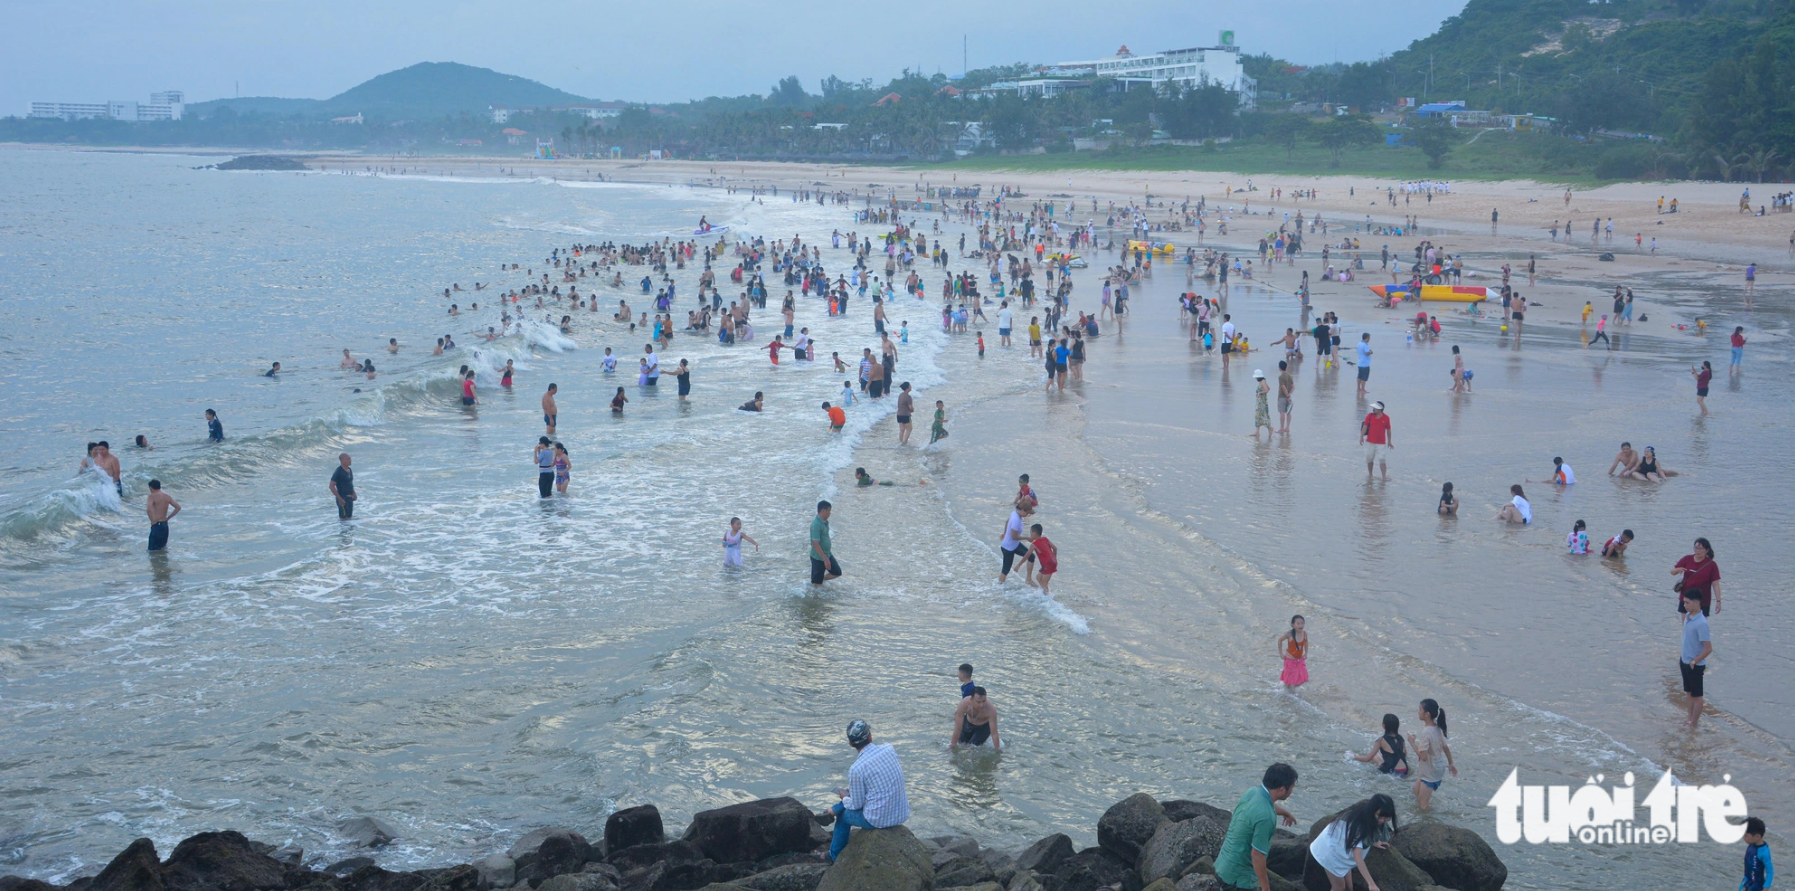 Vietnam’s Phan Thiet City overrun by tourists on weekends